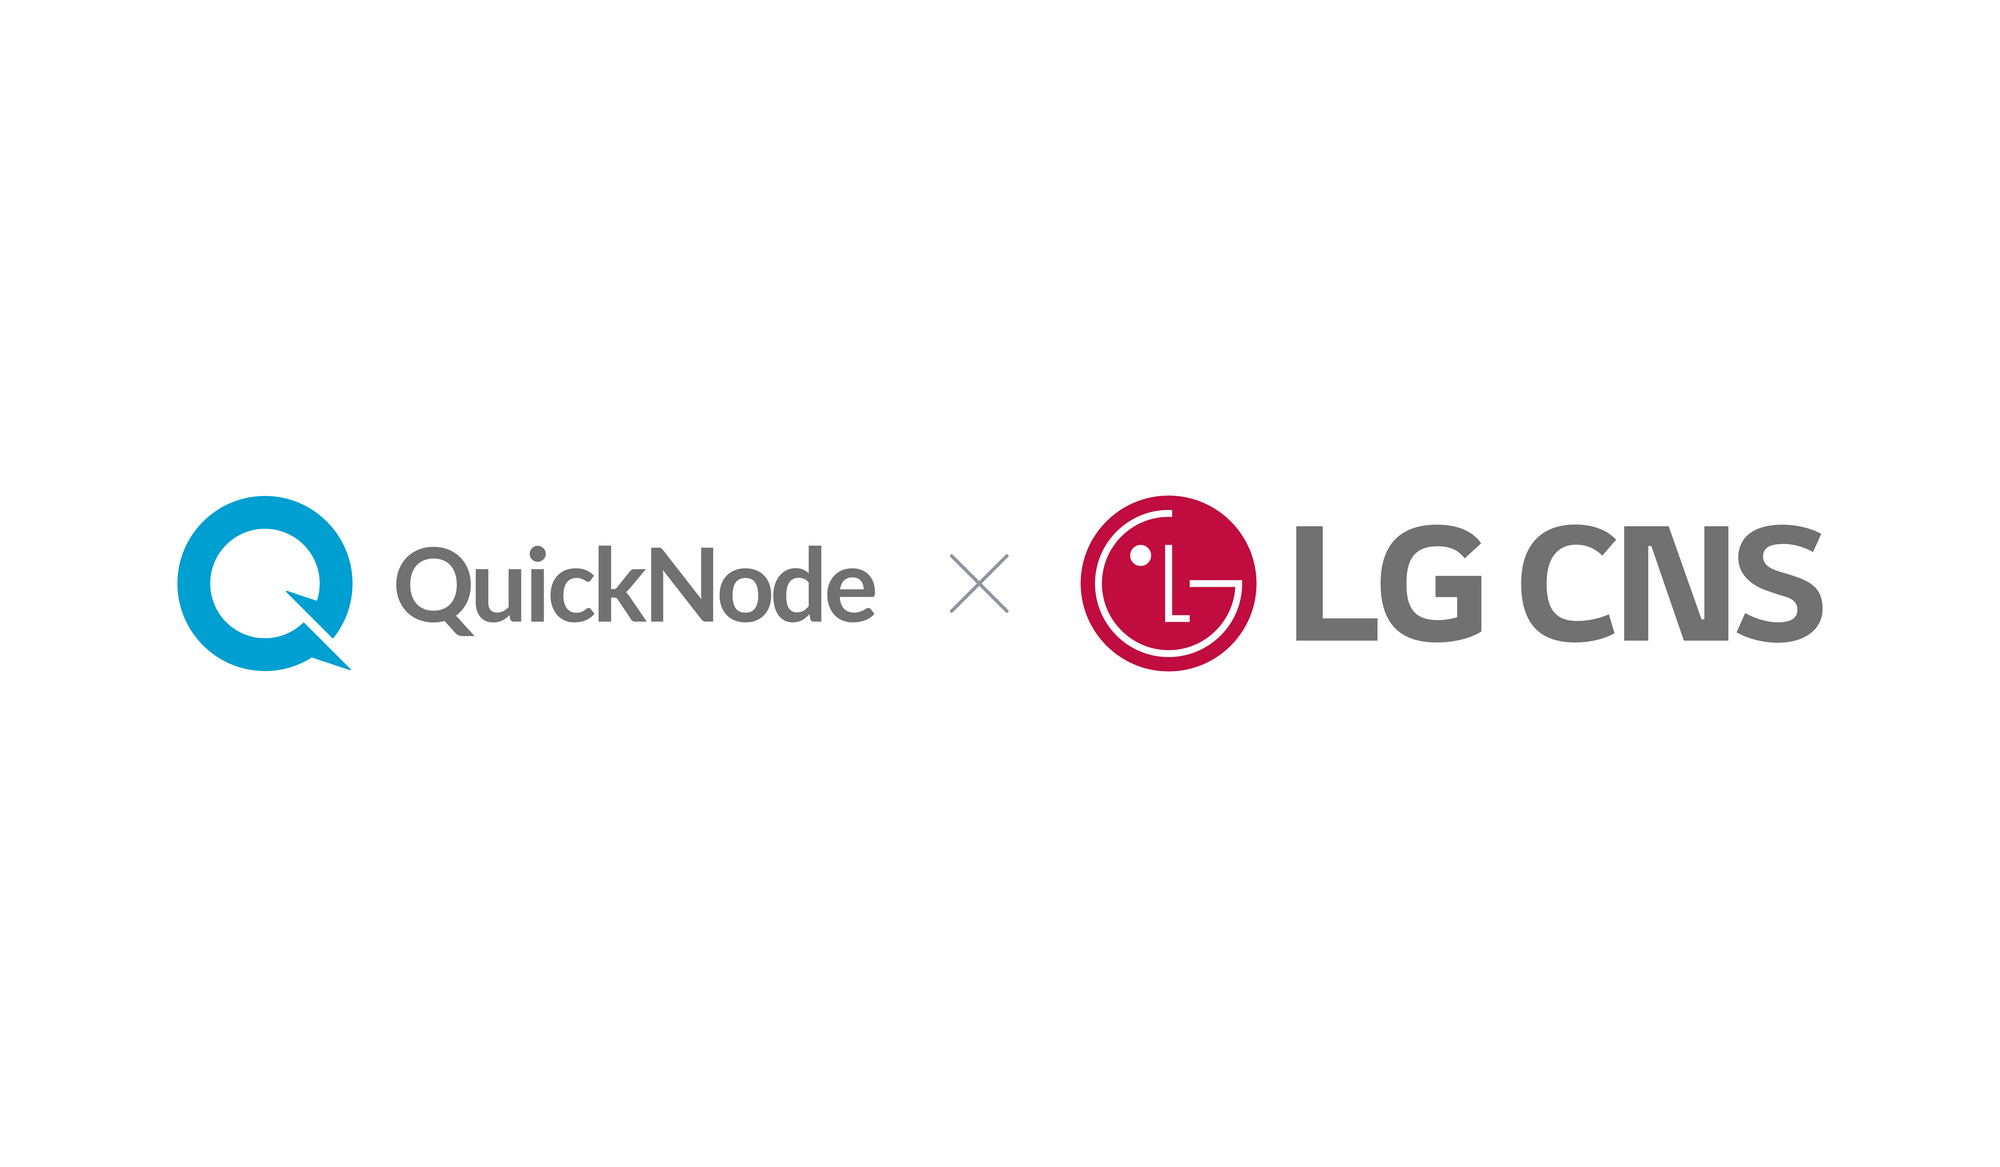 QuickNode Partners with LG CNS to Power Blockchain Innovation in Asia